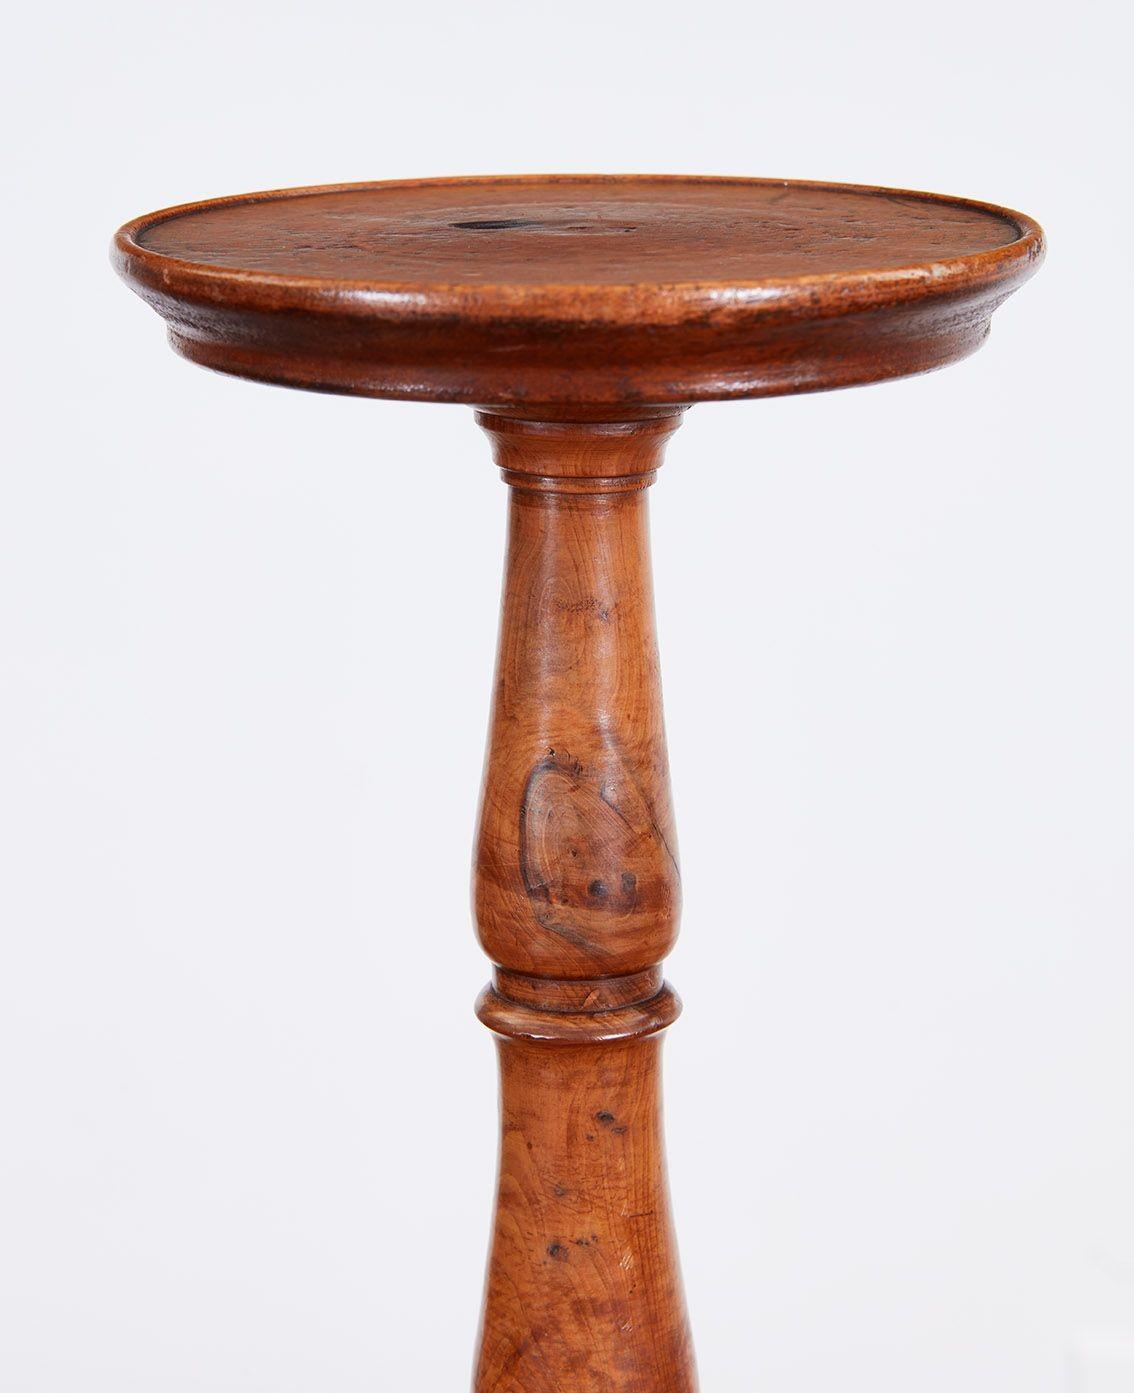 Good pair of 19th century English polished yew wood and mahogany turned stands for hats, the slightly dished mahogany top over balustrade turned yew shafts and standing on ring turned mahogany base, possessing good rich color and patination.